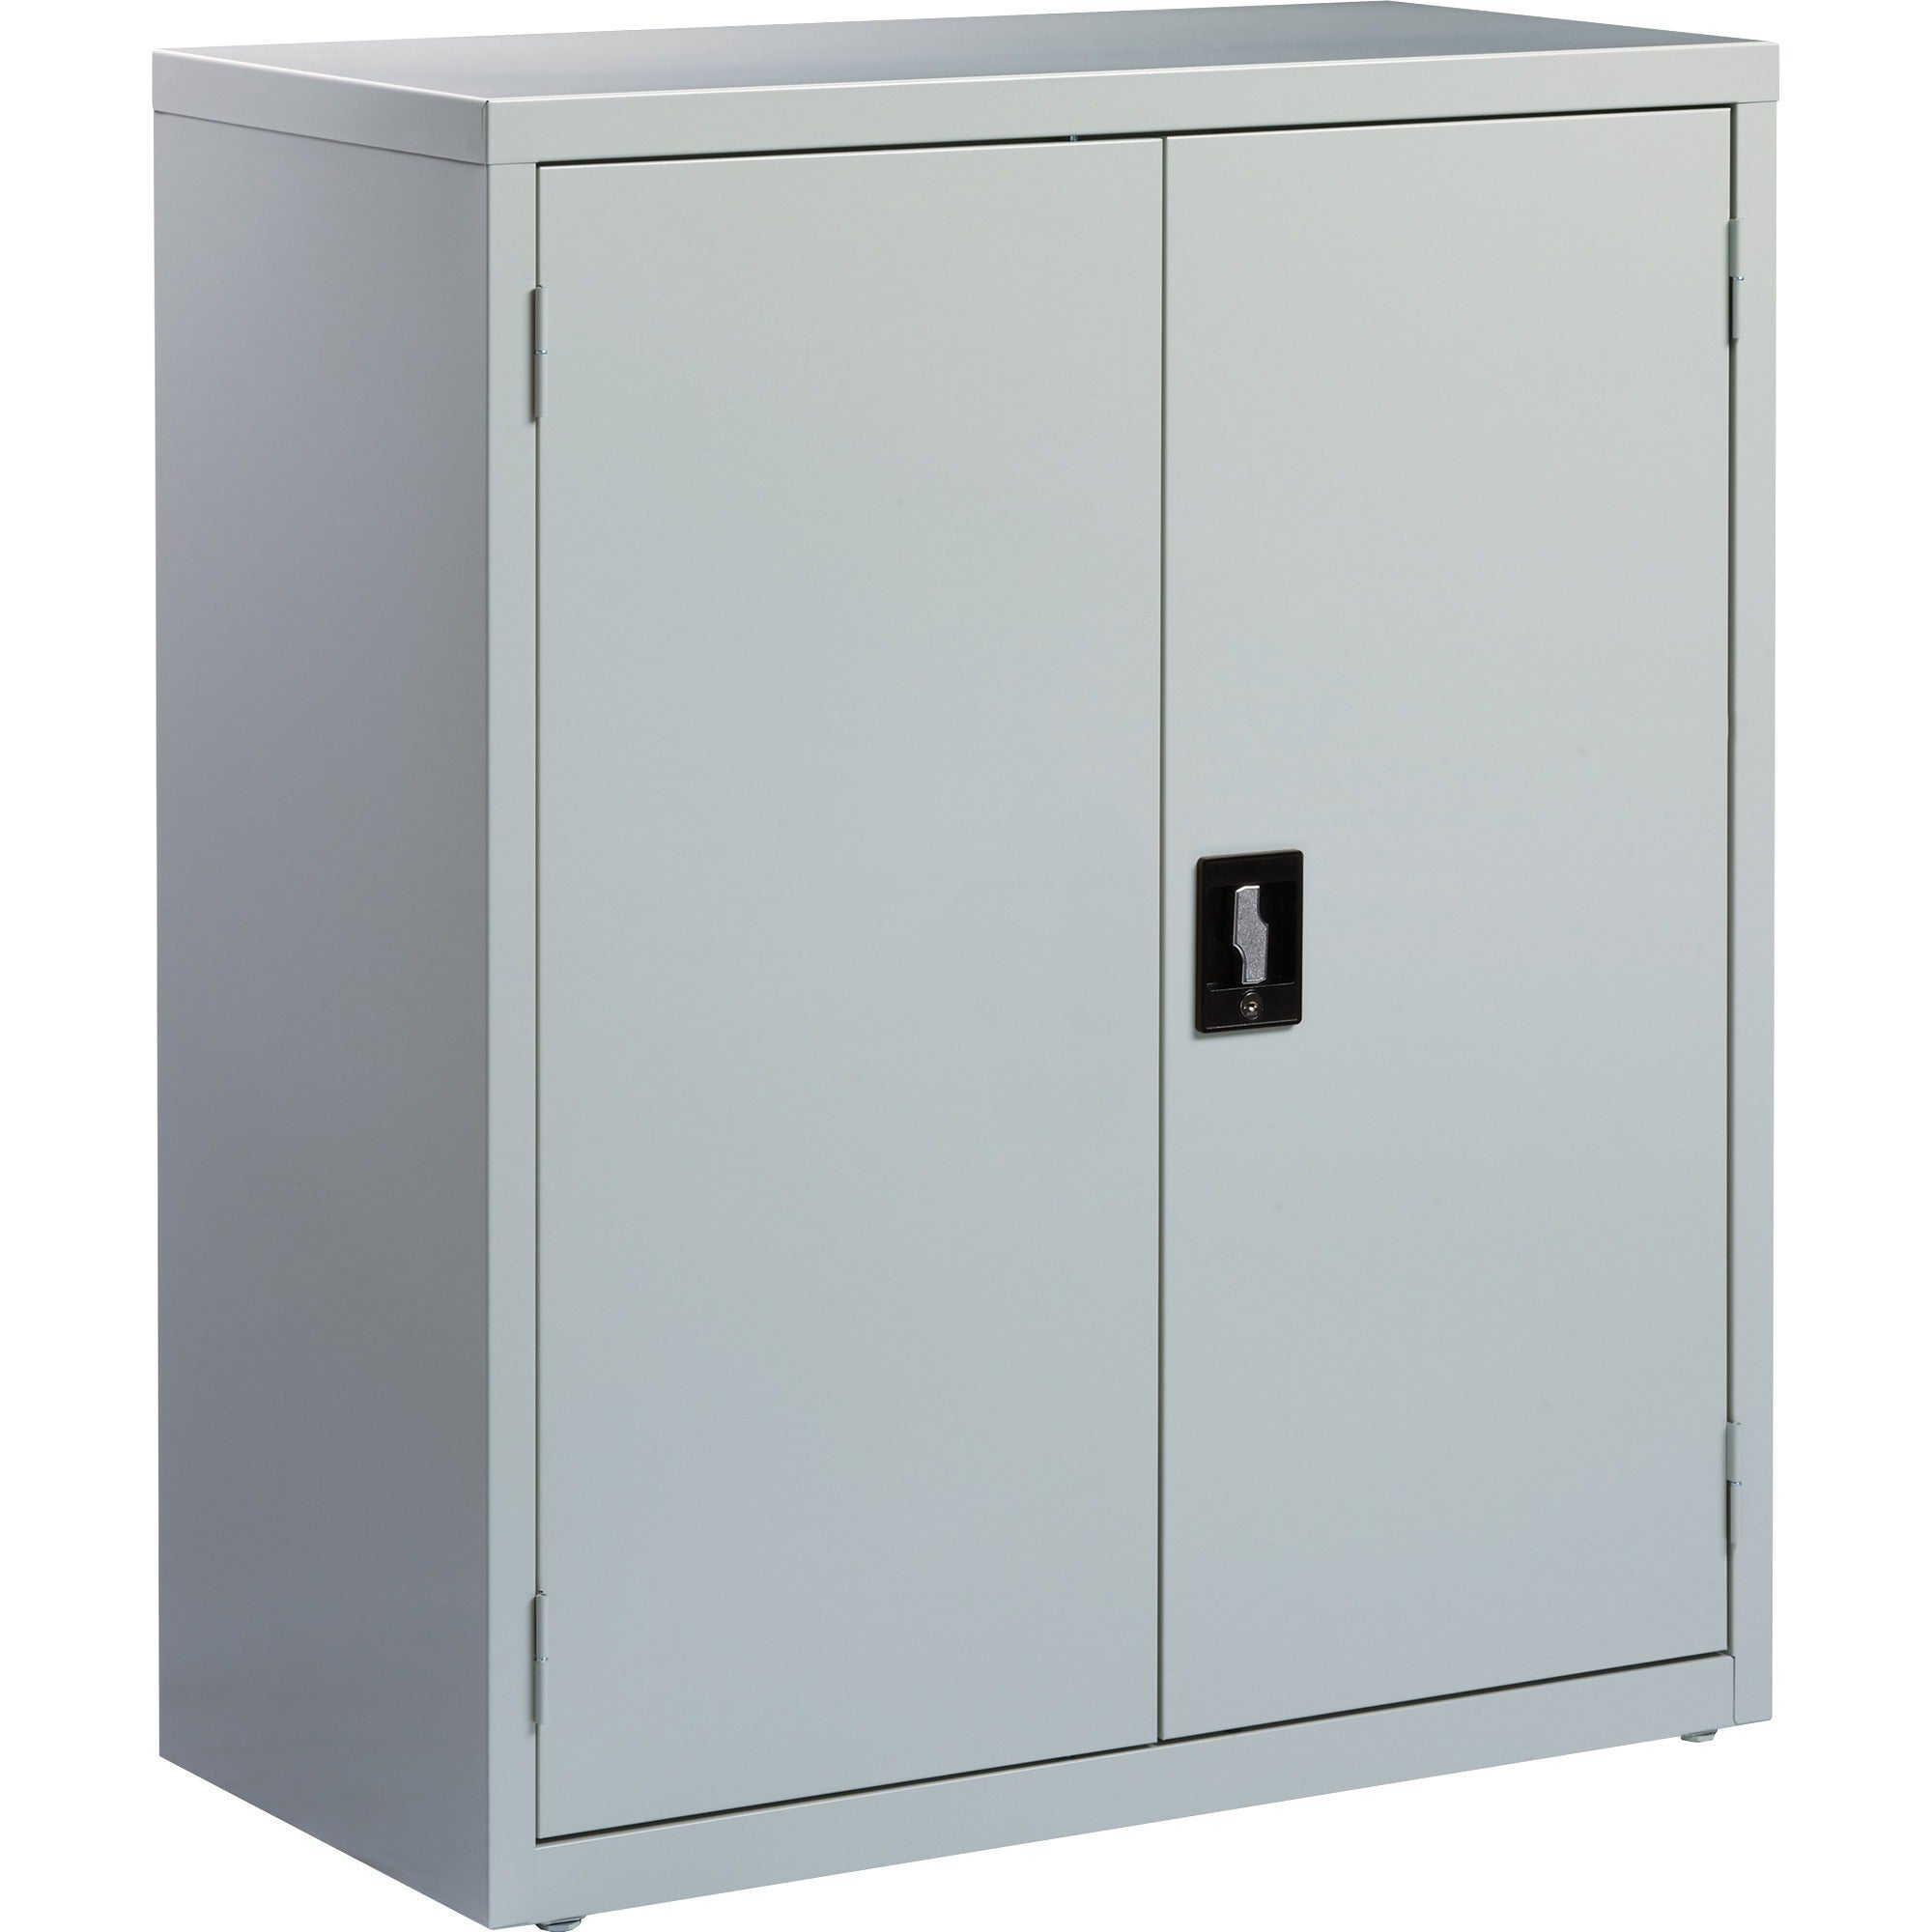 Lorell Fortress Series Storage Cabinet - 18" x 36" x 42" - 3 x Shelf(ves) - Recessed Locking Handle, Hinged Door, Durable, Sturdy, Adjustable Shelf - Light Gray - Powder Coated - Steel - Recycled - 